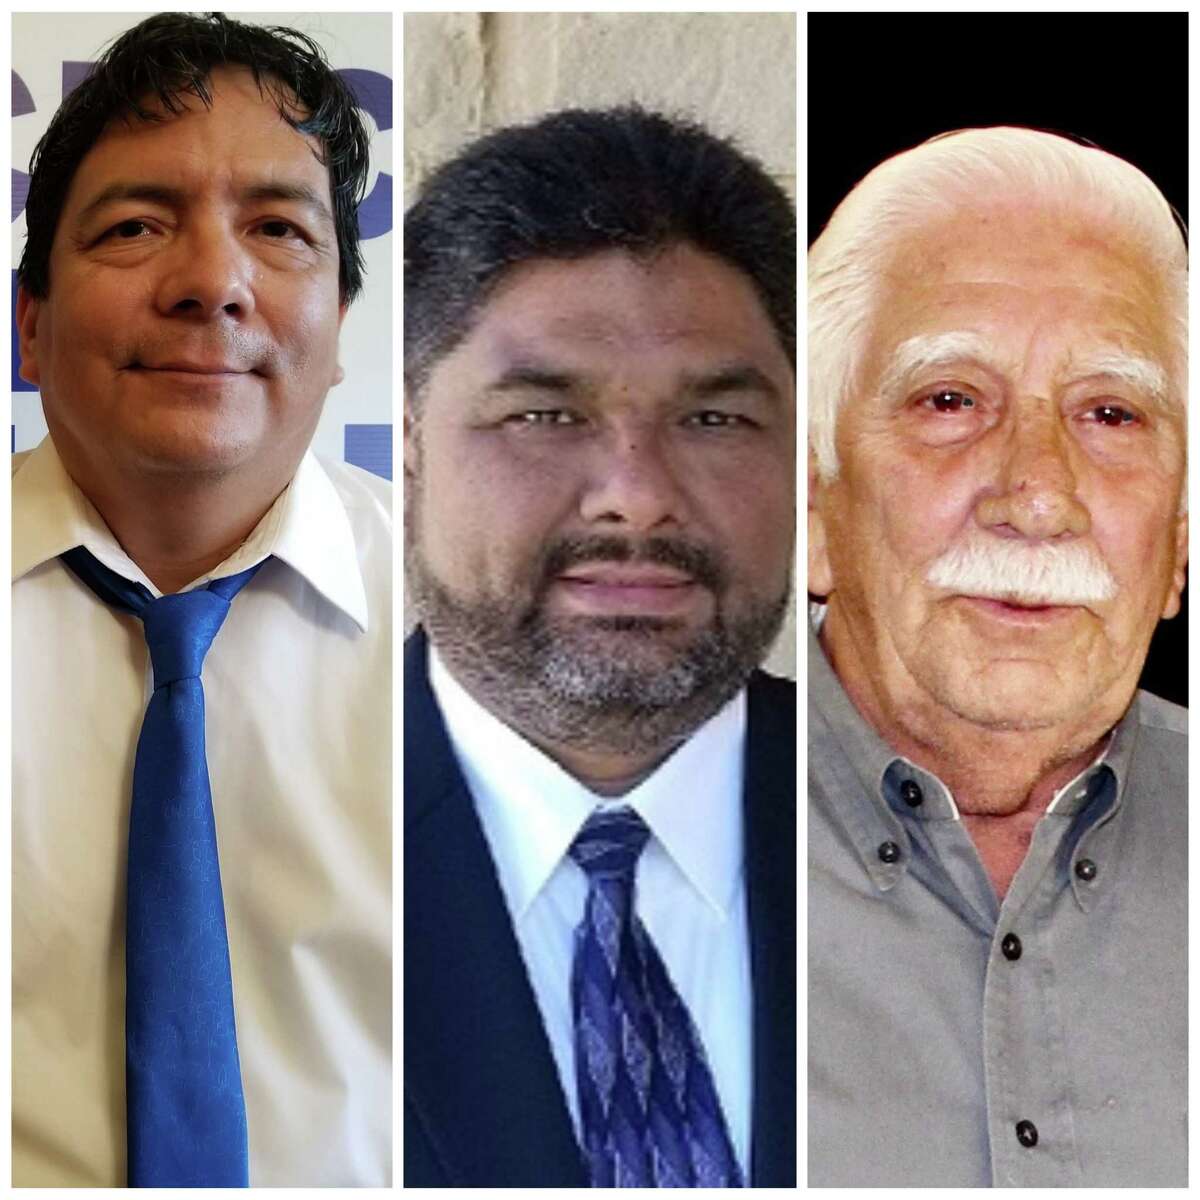 Leo Salas, 80, at right, said he isn’t ready to retire after 26 years on the Somerset ISD board. But Francisco “Franky” De Luna, 55, from left, and Frank Munoz, 51, want to bring some fresh perspective to the board.